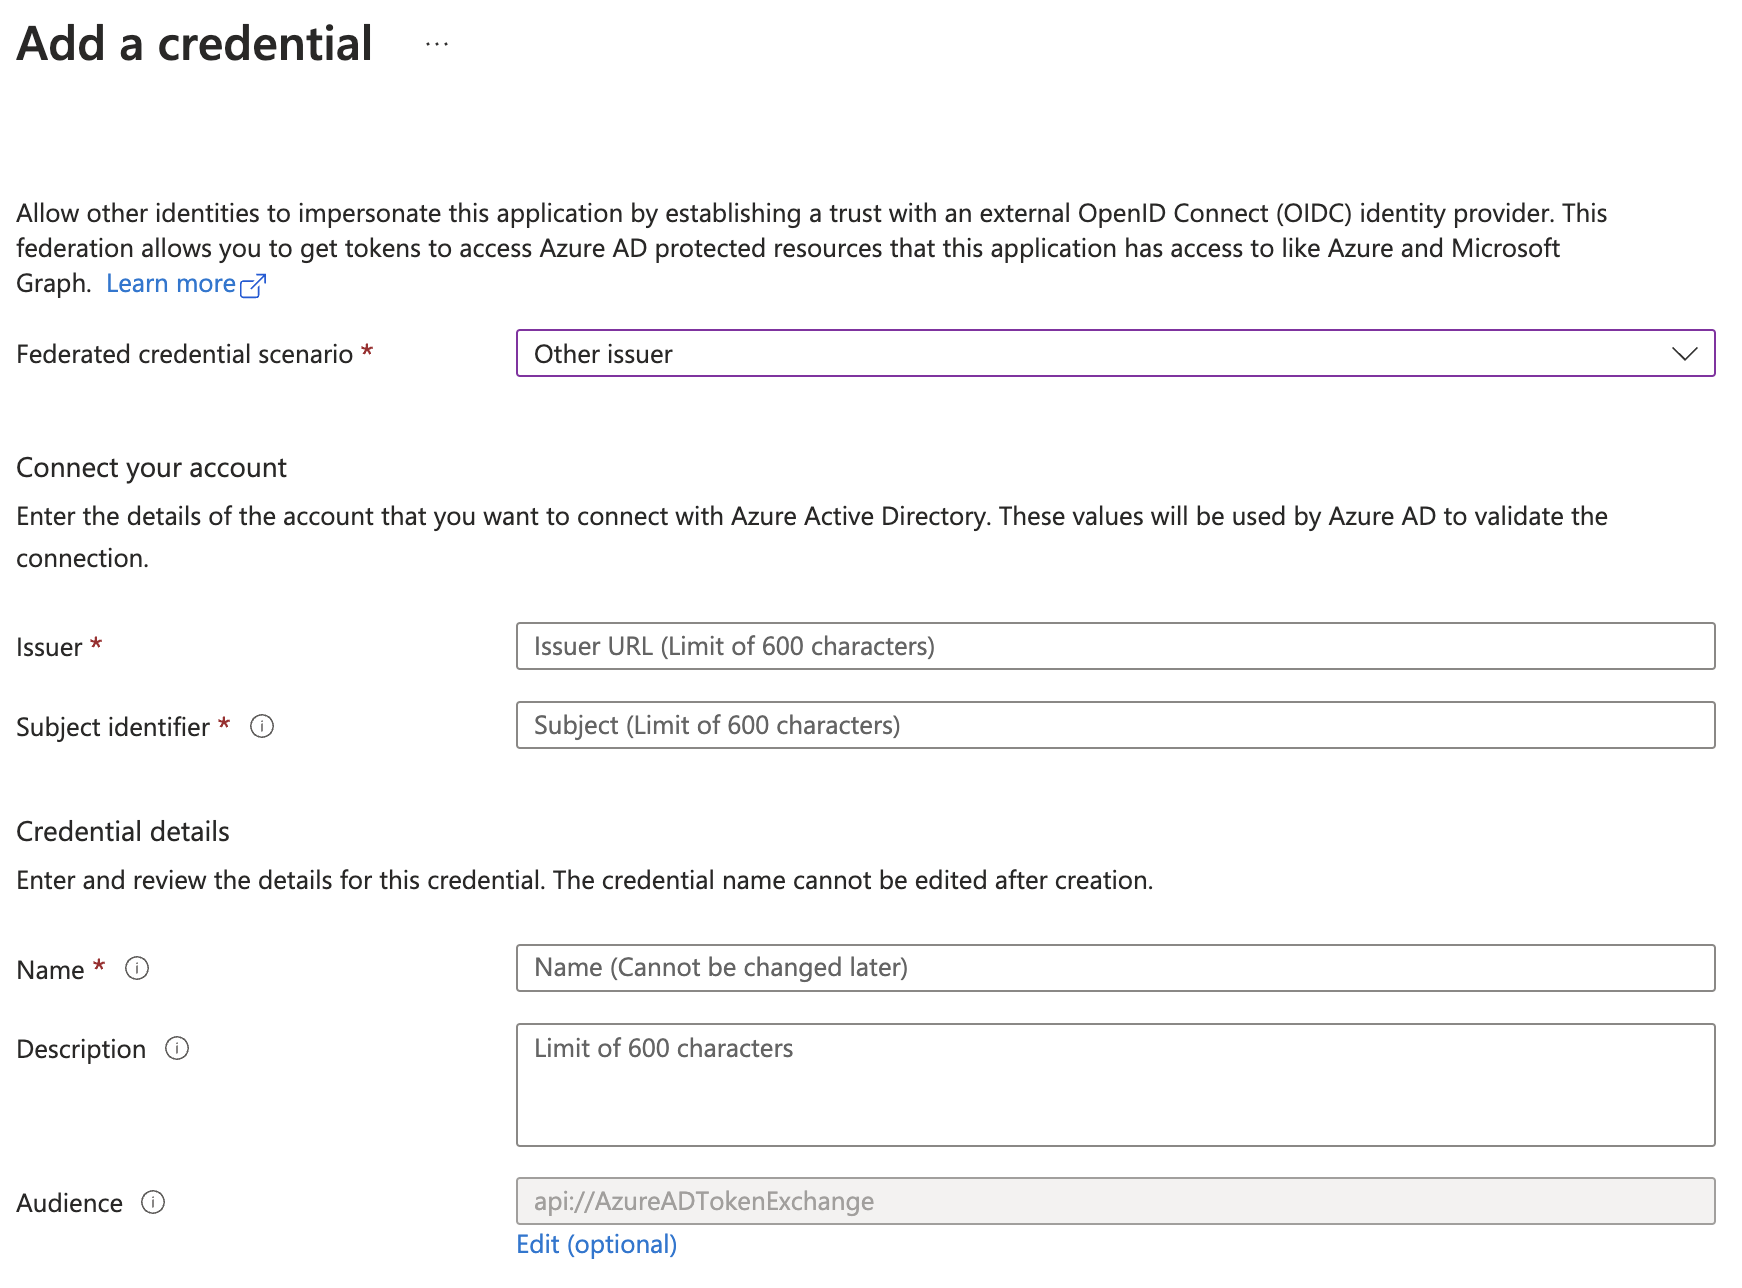 Adding a federated credential